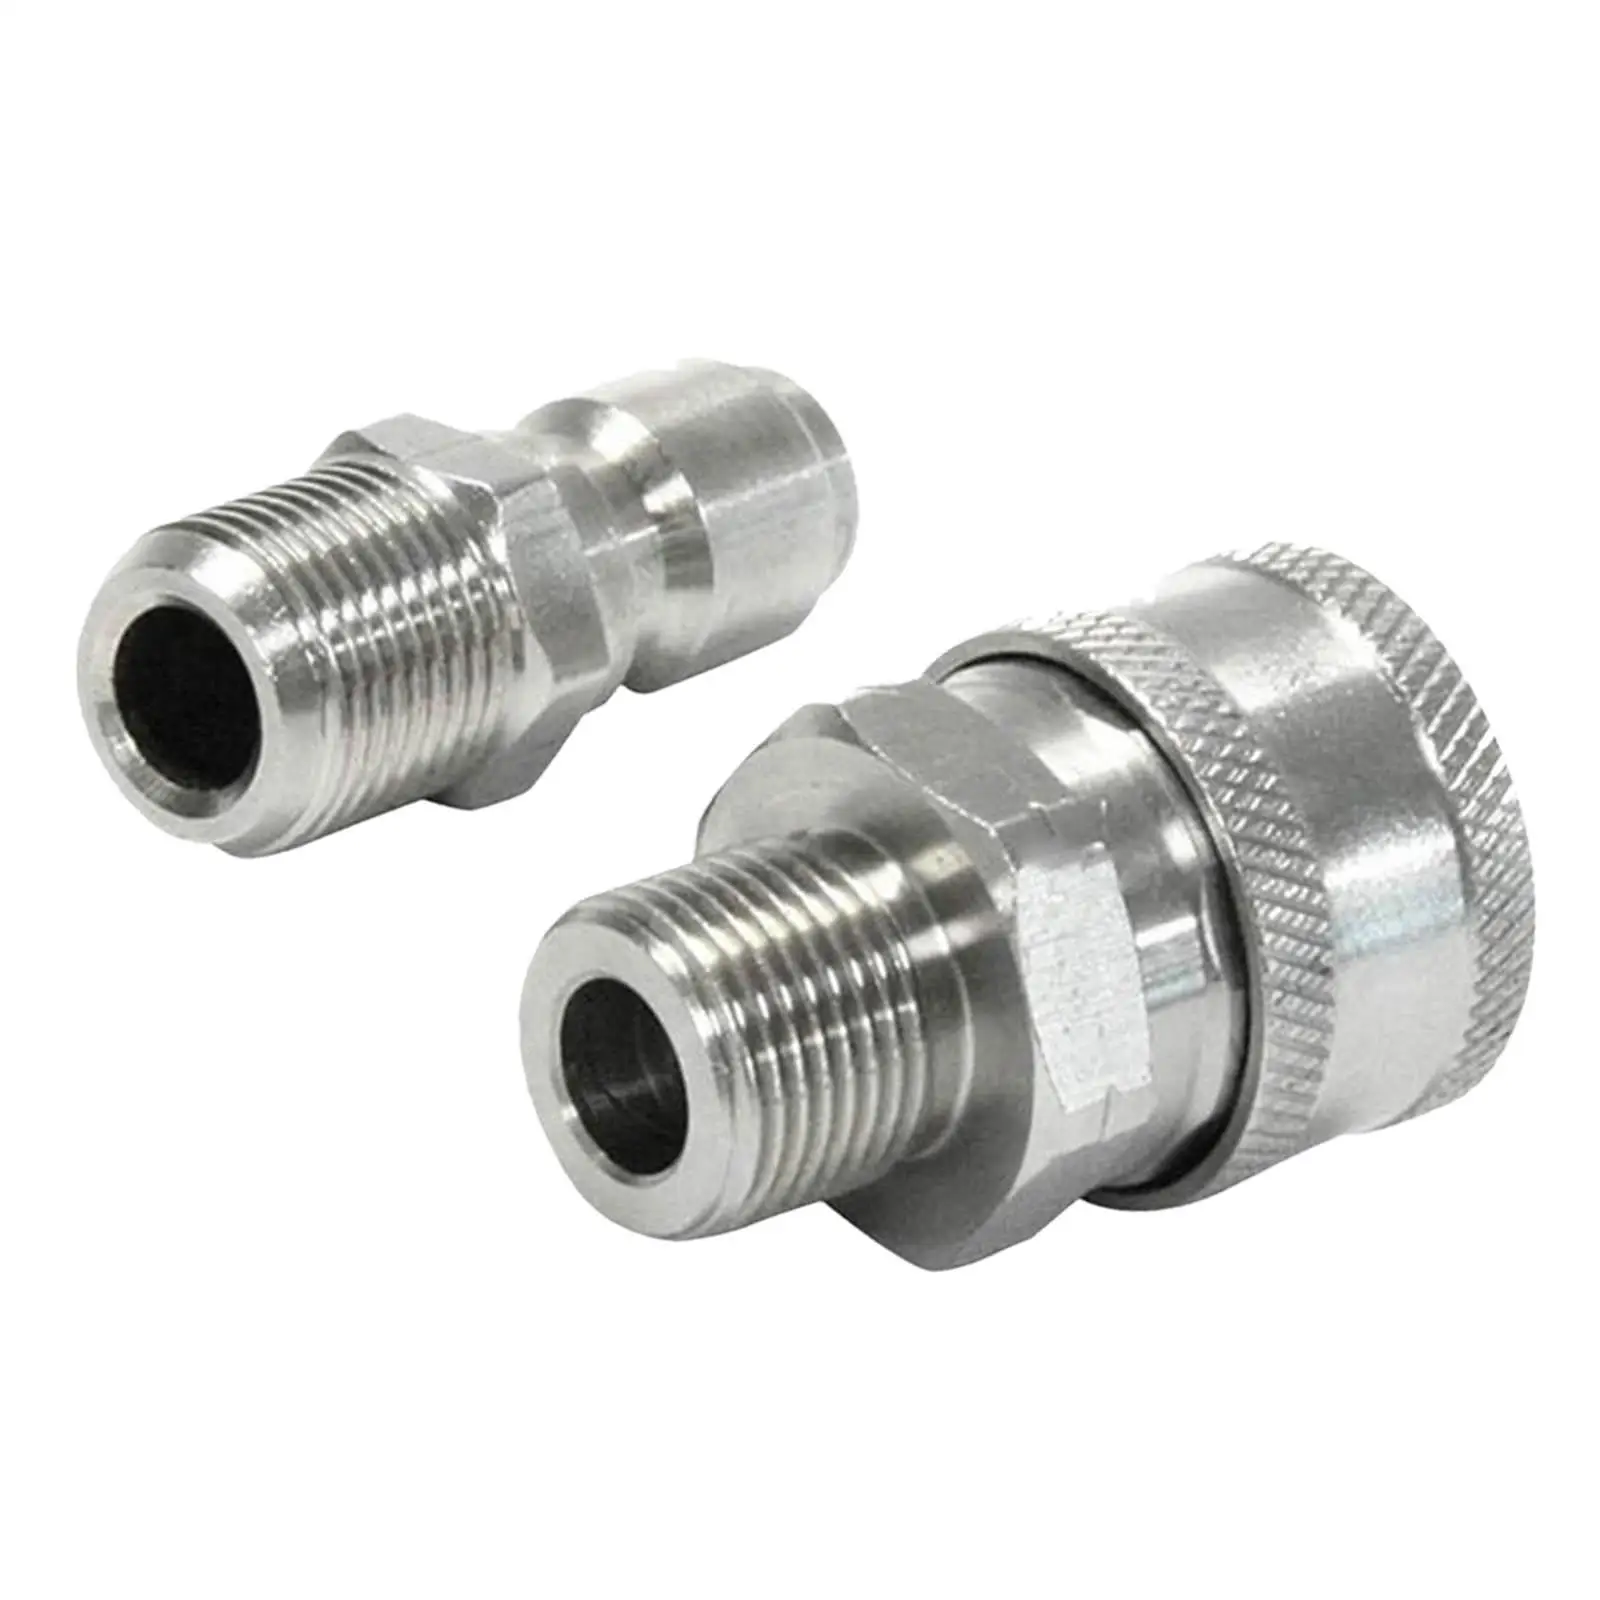 2 Pieces Pressure Washer Adapter Set 3/8 inch Hose for Hot and Cold Water Surface Cleaner